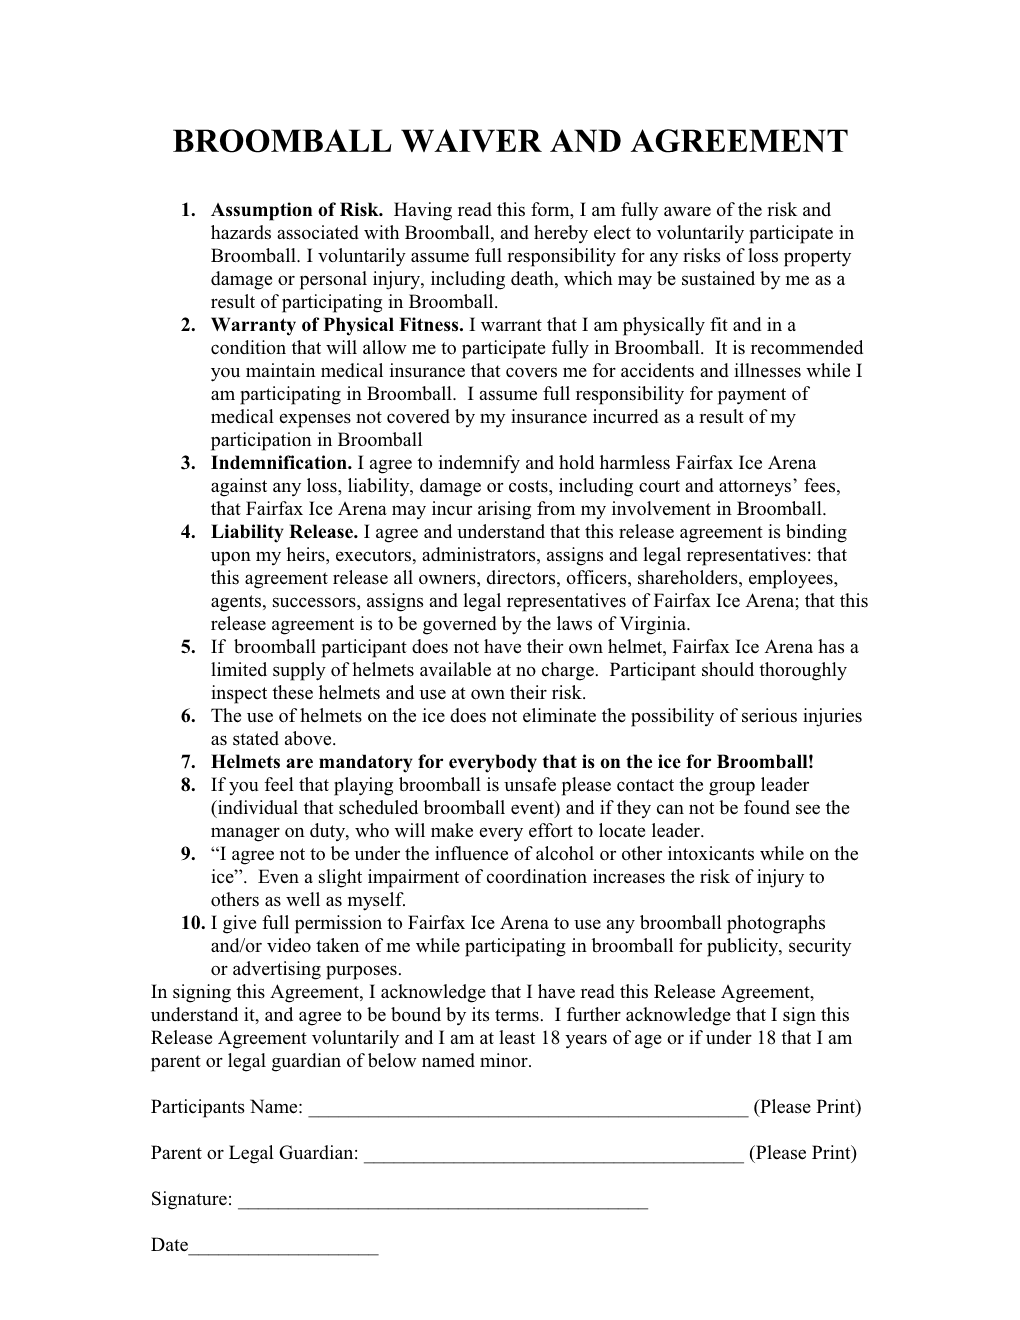 Broomball Waiver and Agreement